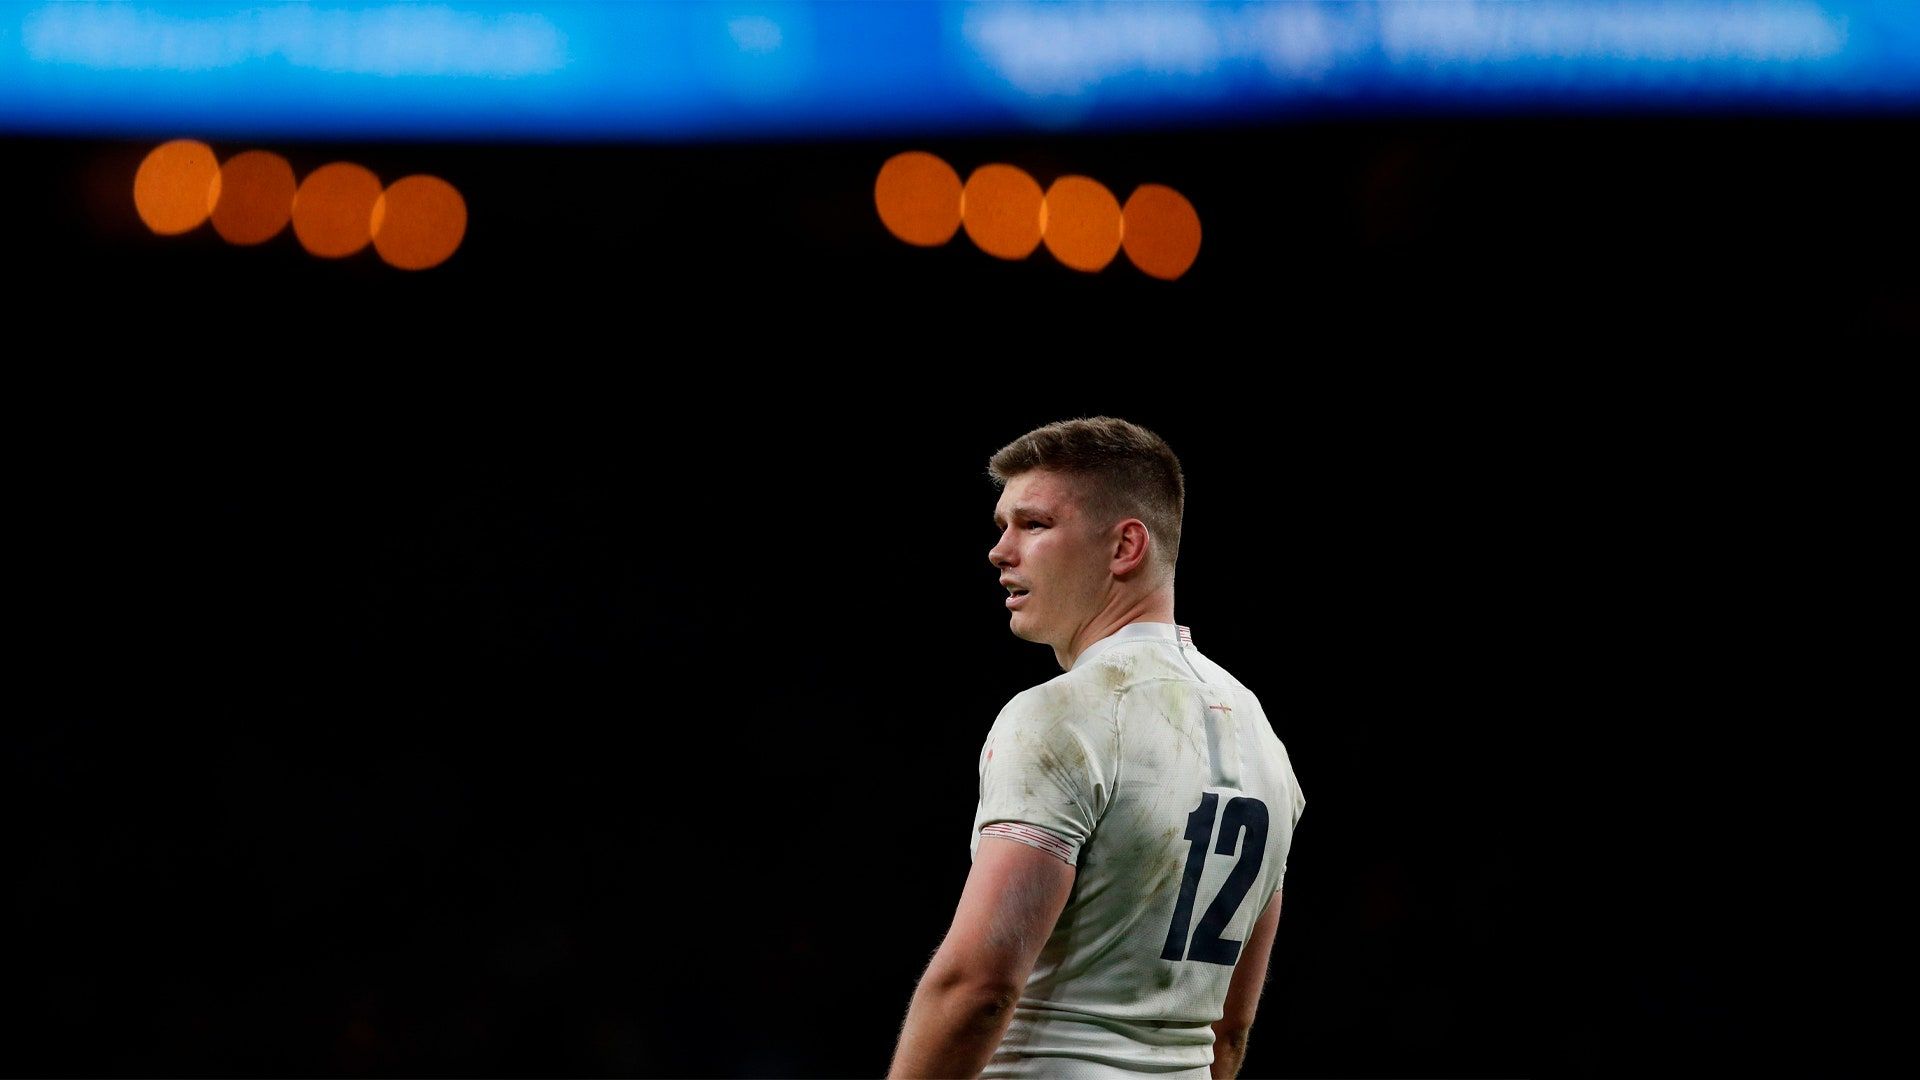 Owen Farrell Interview: Childhood Heroes, James Haskell's Video Diaries, And His Go To Karaoke Song